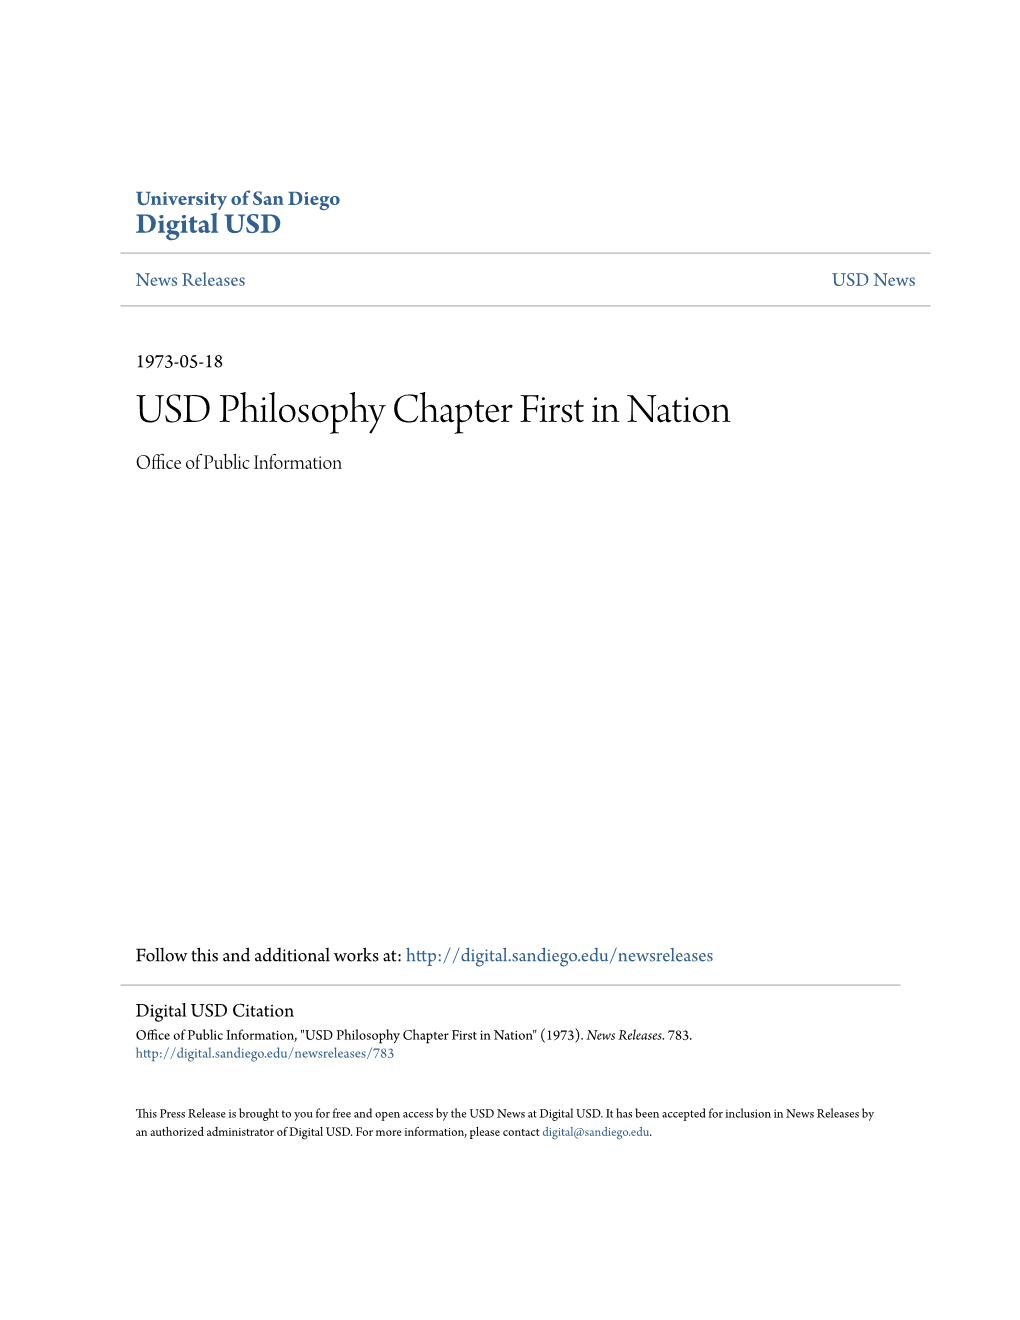 USD Philosophy Chapter First in Nation Office of Publicnfor I Mation